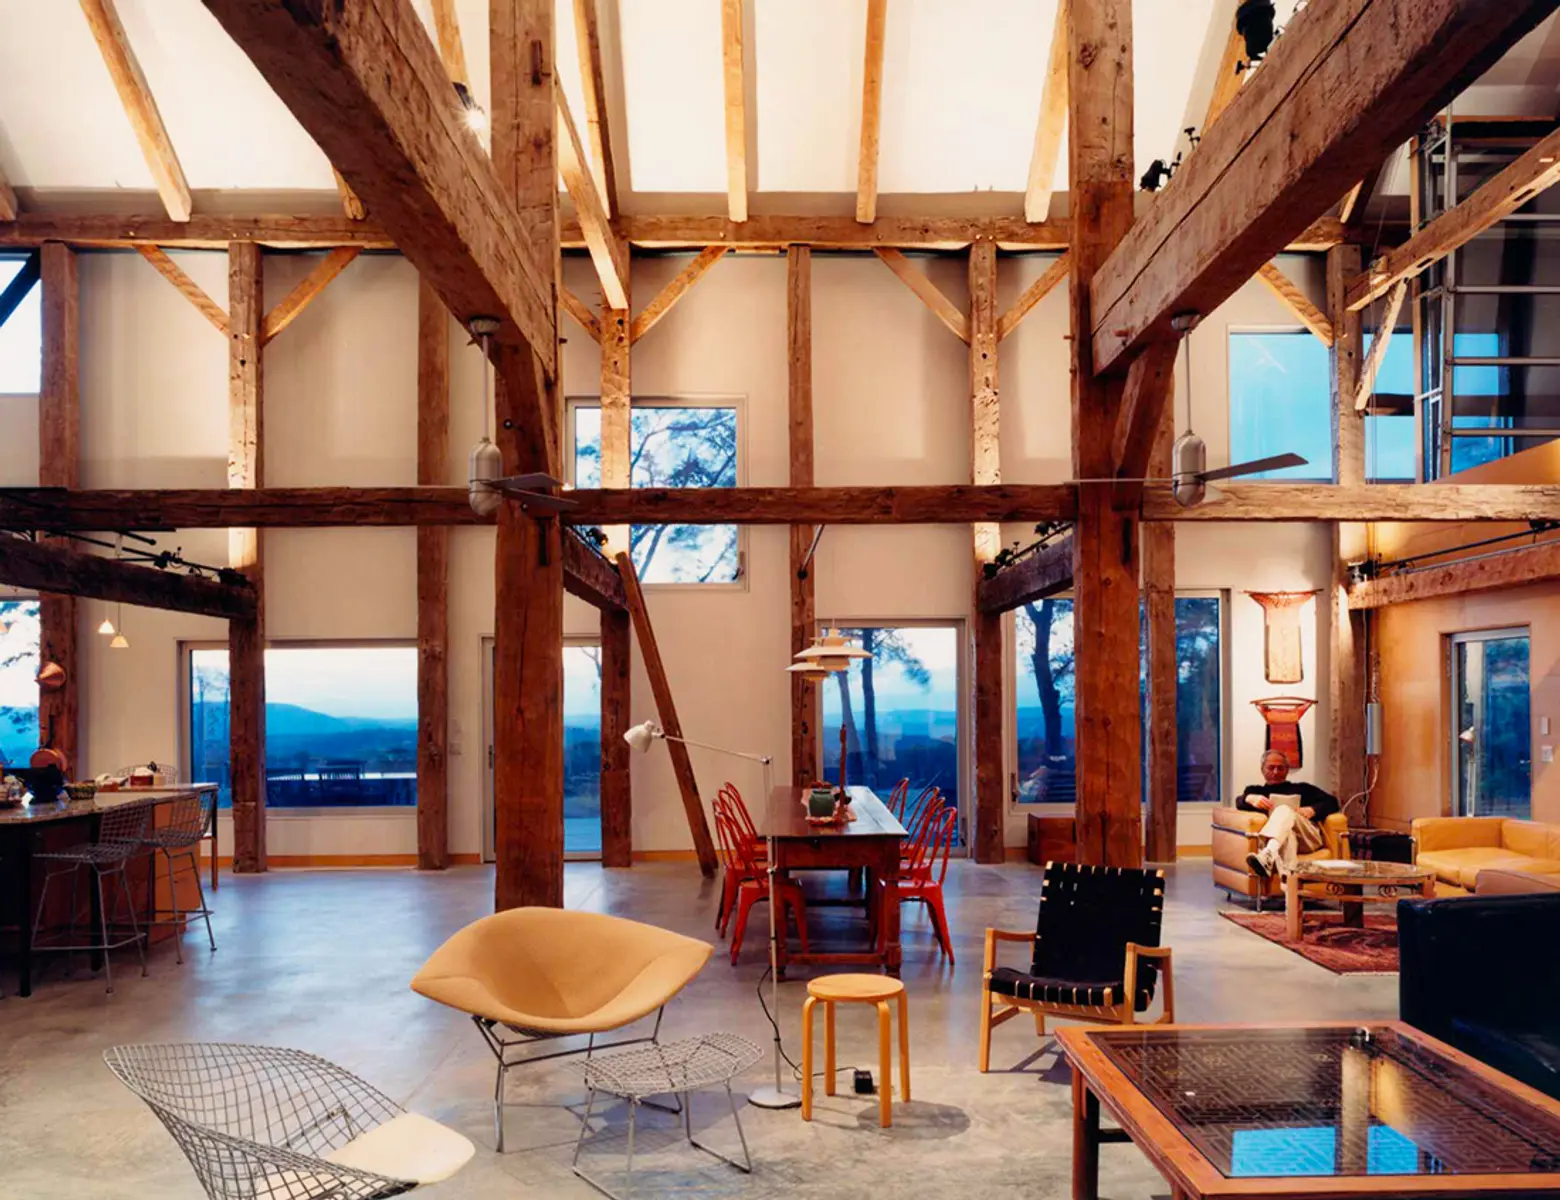 Preston Scott Cohen Builds a Brilliant Upstate Home from an Old Dutch Barn